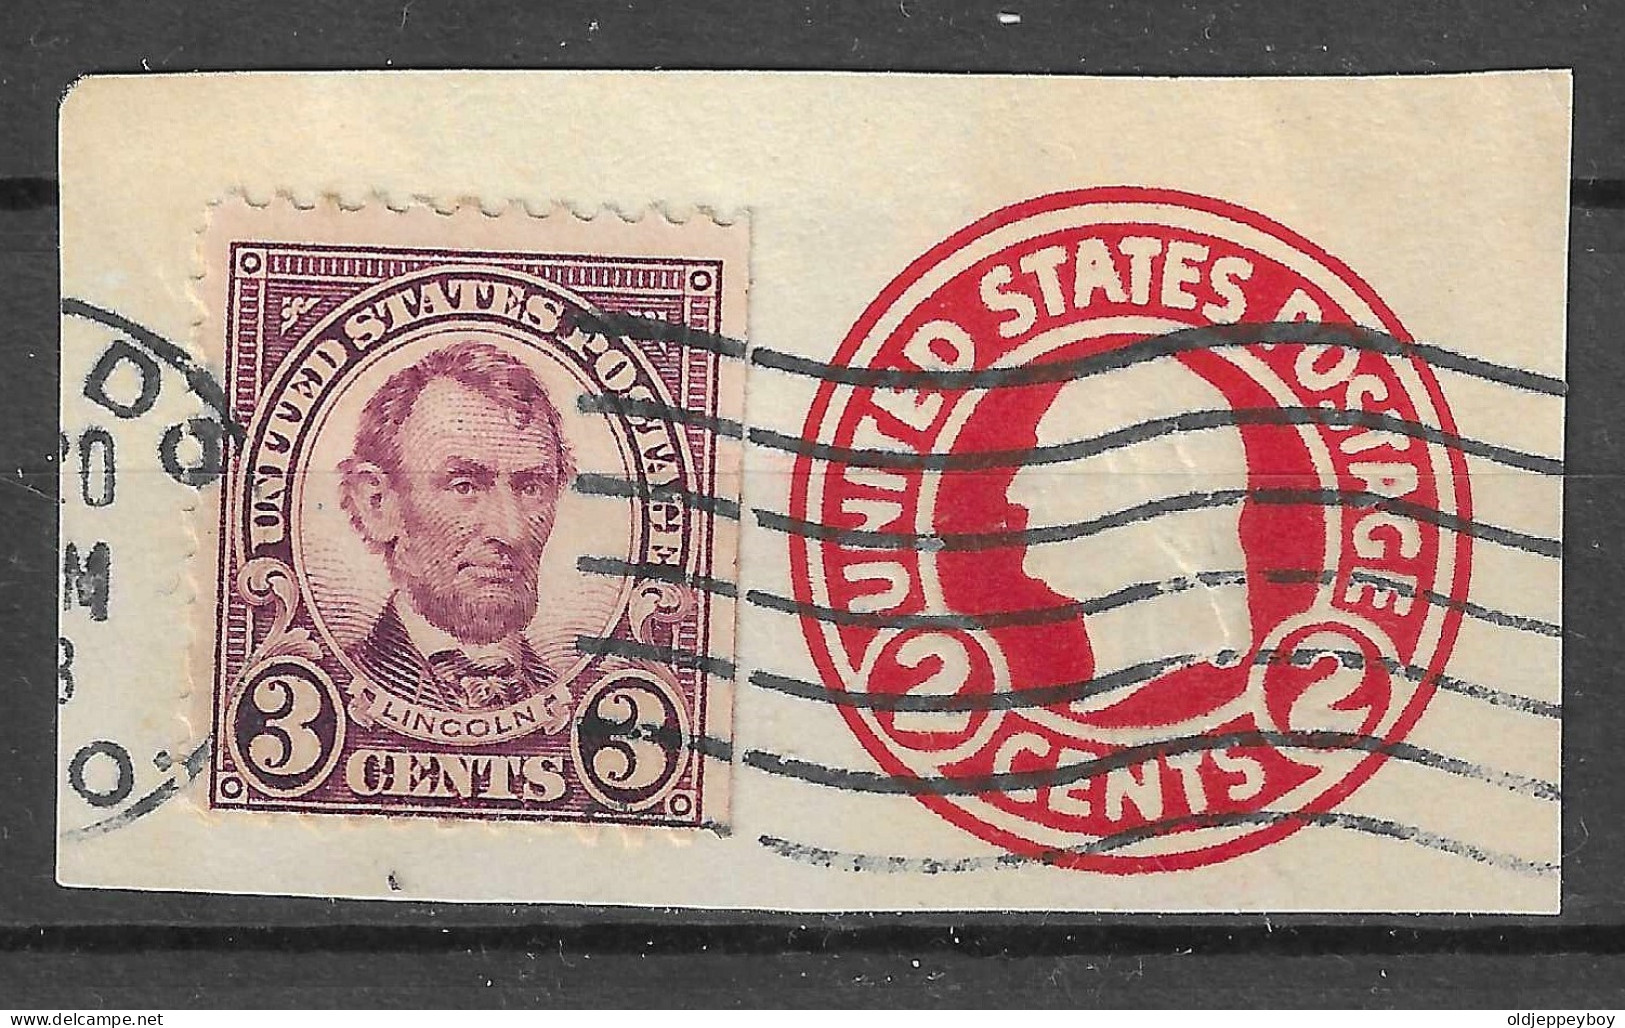 1922 / 1925 N° 230 UNITED STATES POSTAGE PRESIDENT LINCOLN 3 CENTS  OBLITÉRÉ ON COVER 1928  - Erinnofilia